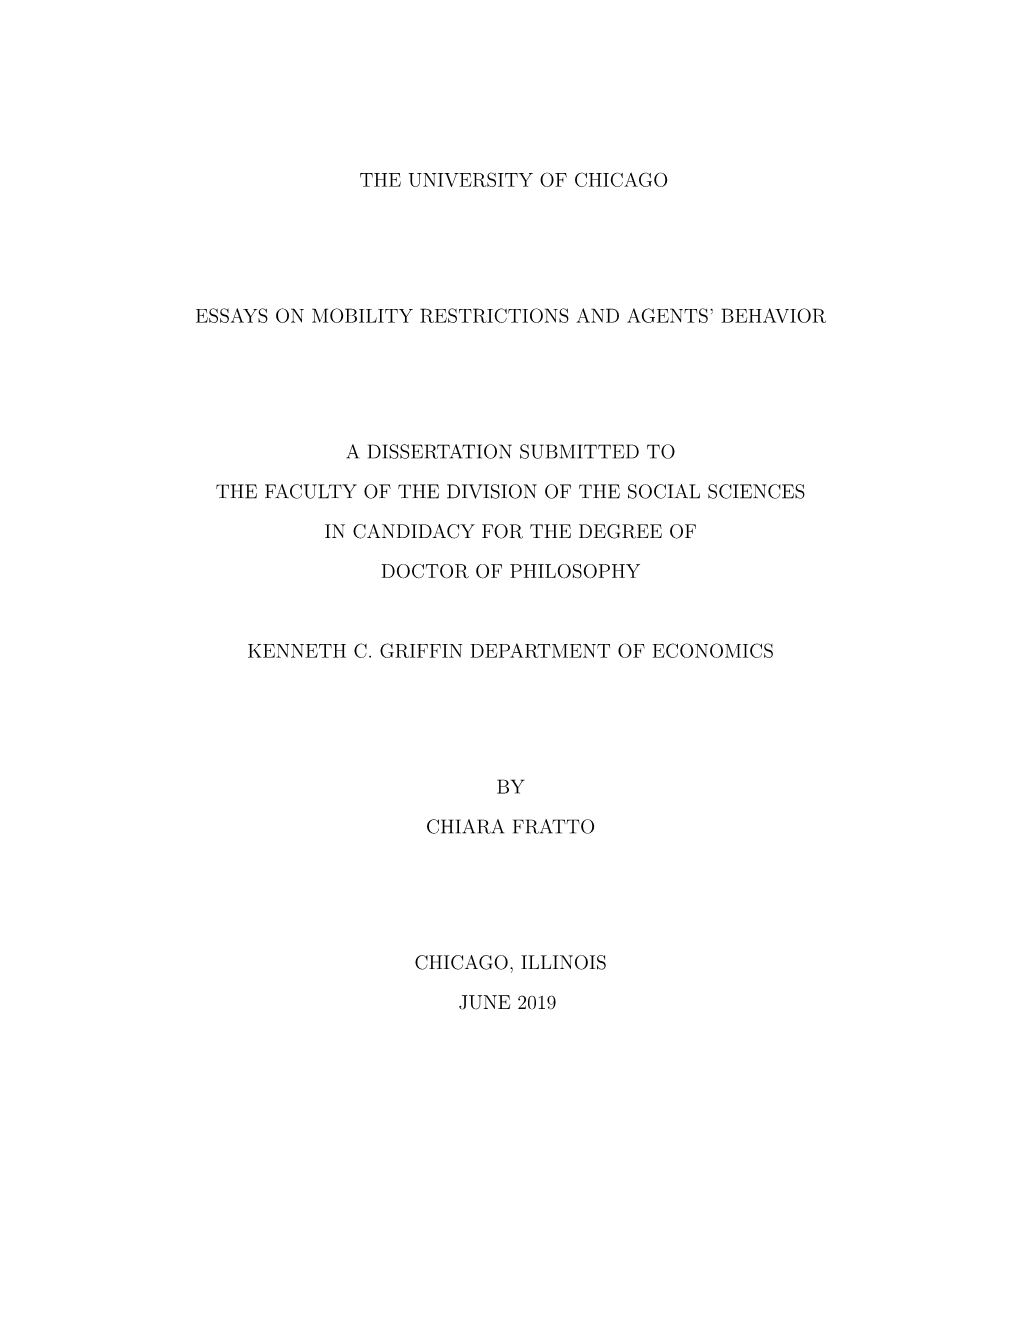 The University of Chicago Essays on Mobility